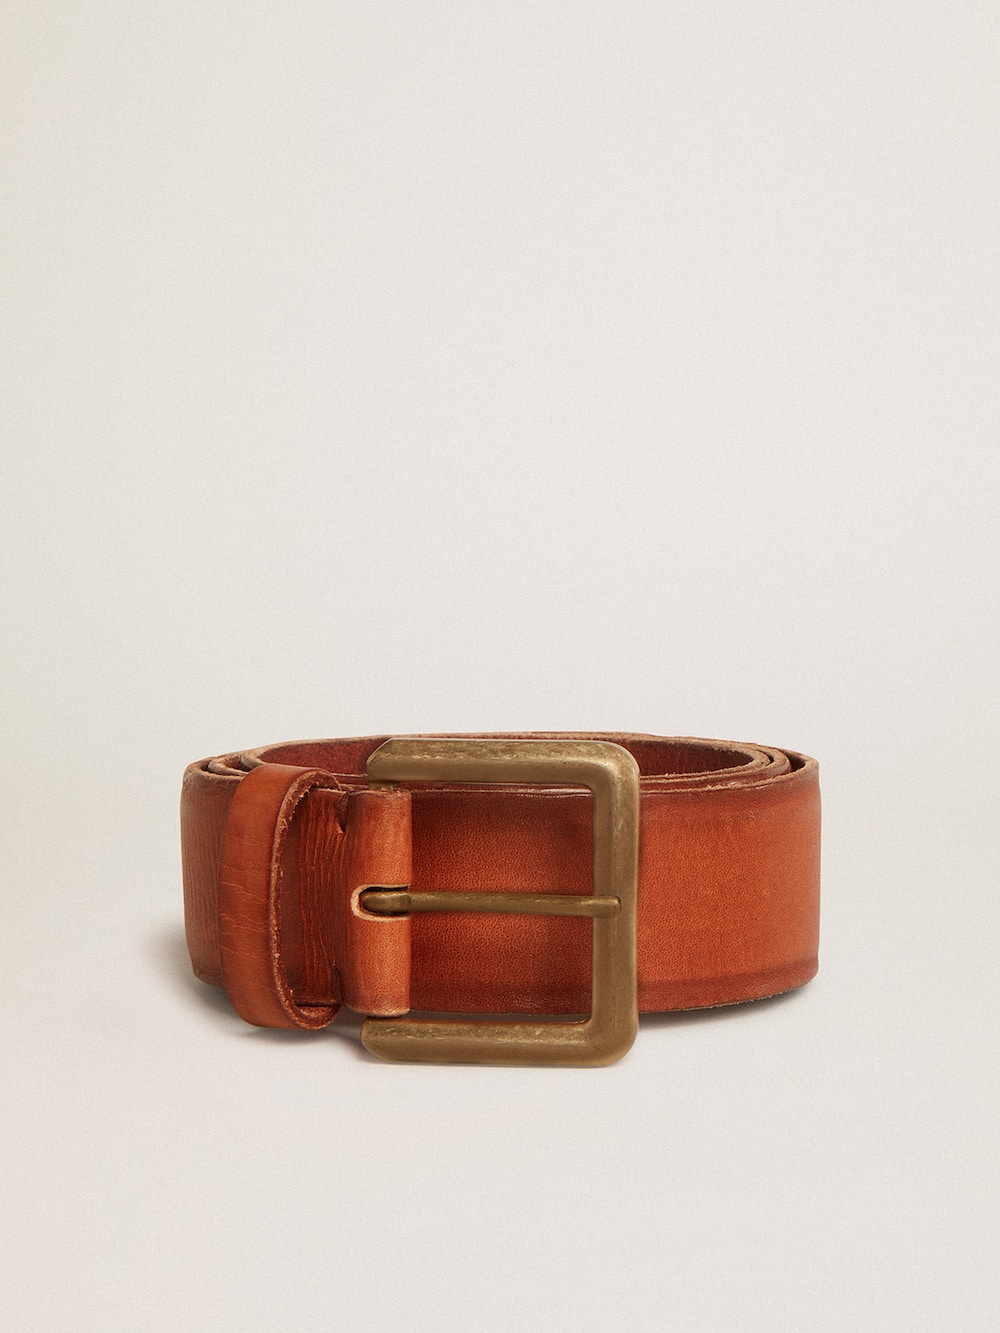 Golden Goose - Belt in tan-colored washed leather with raised print in 